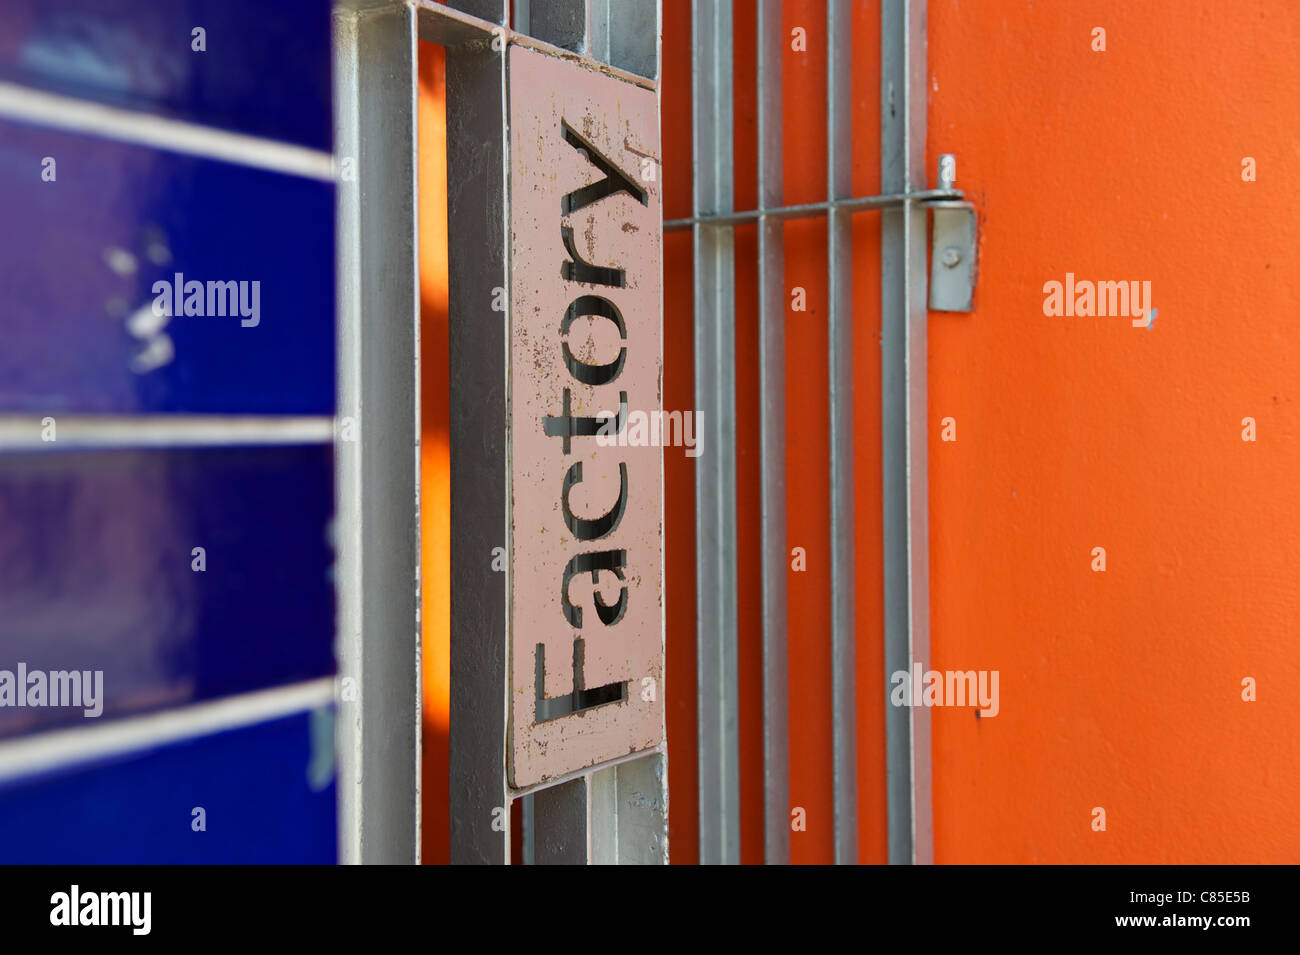 Manchester - FACTORY Records building Stock Photo